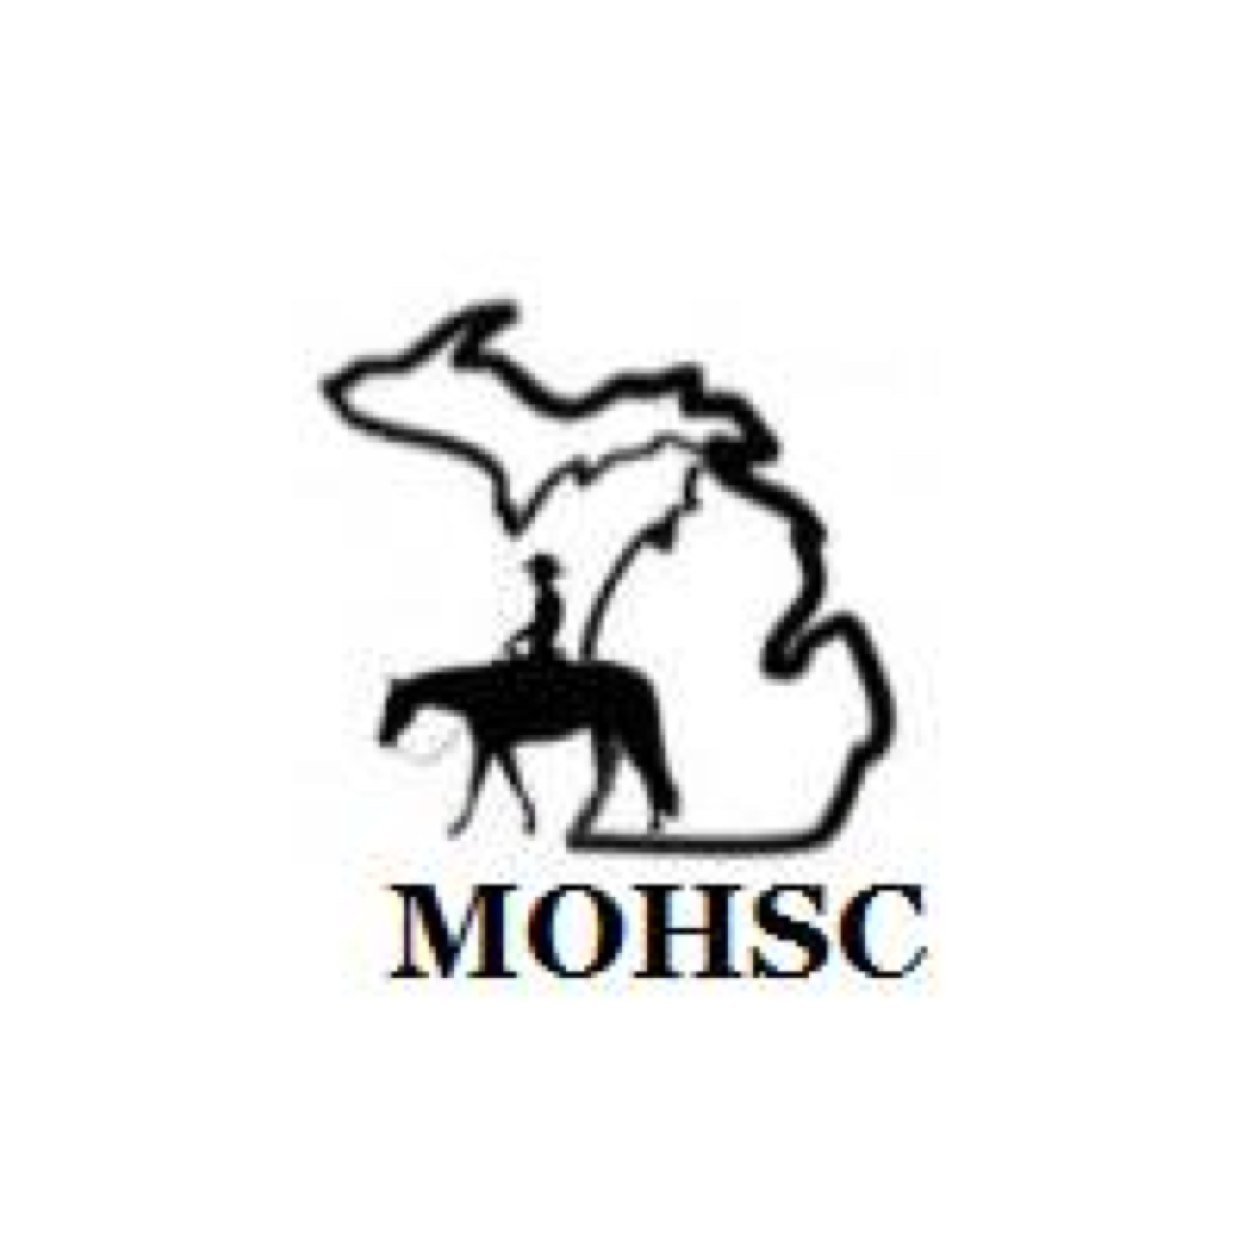 Official Michigan Open Horse Show Championships twitter. Follow us for show updates! September 18th-20th 2015!!! See you there.